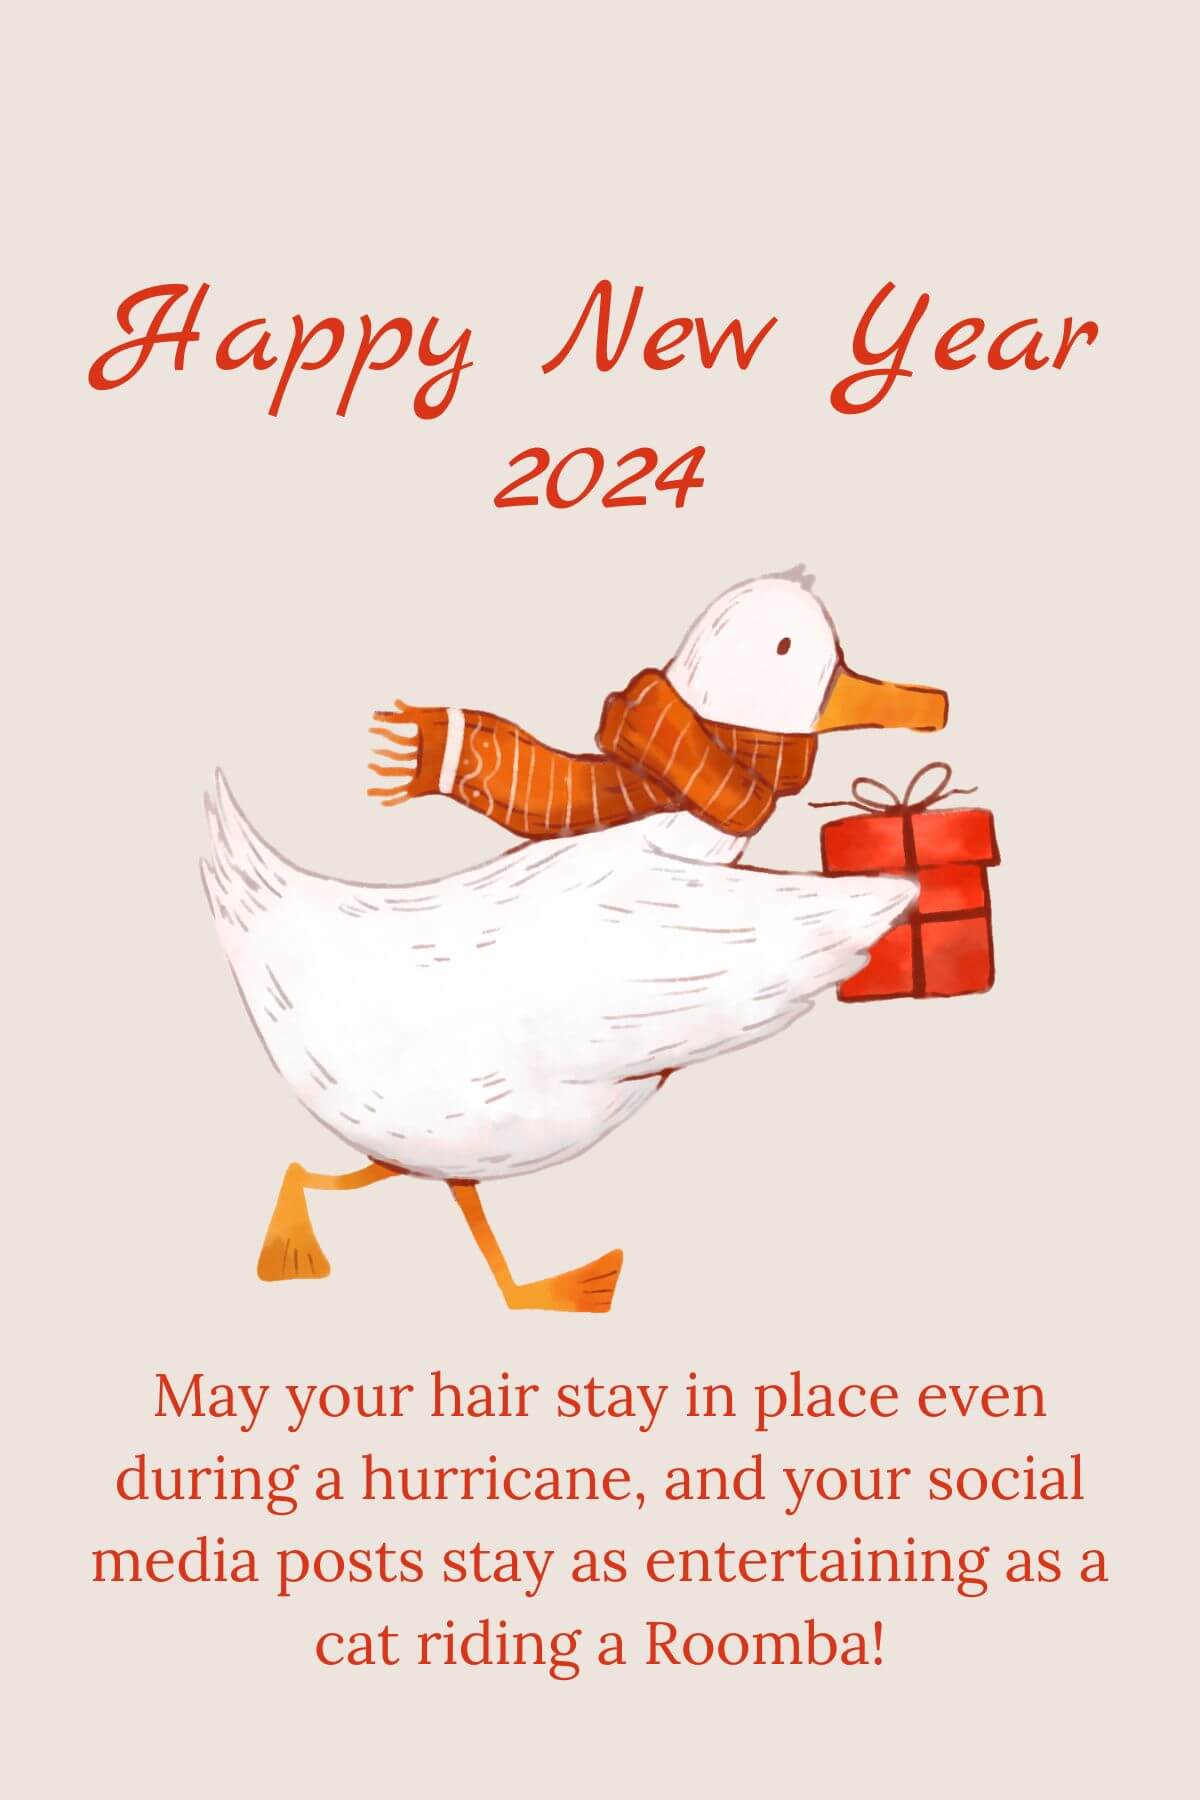 Best Funny Happy New Year 2024 Wishes